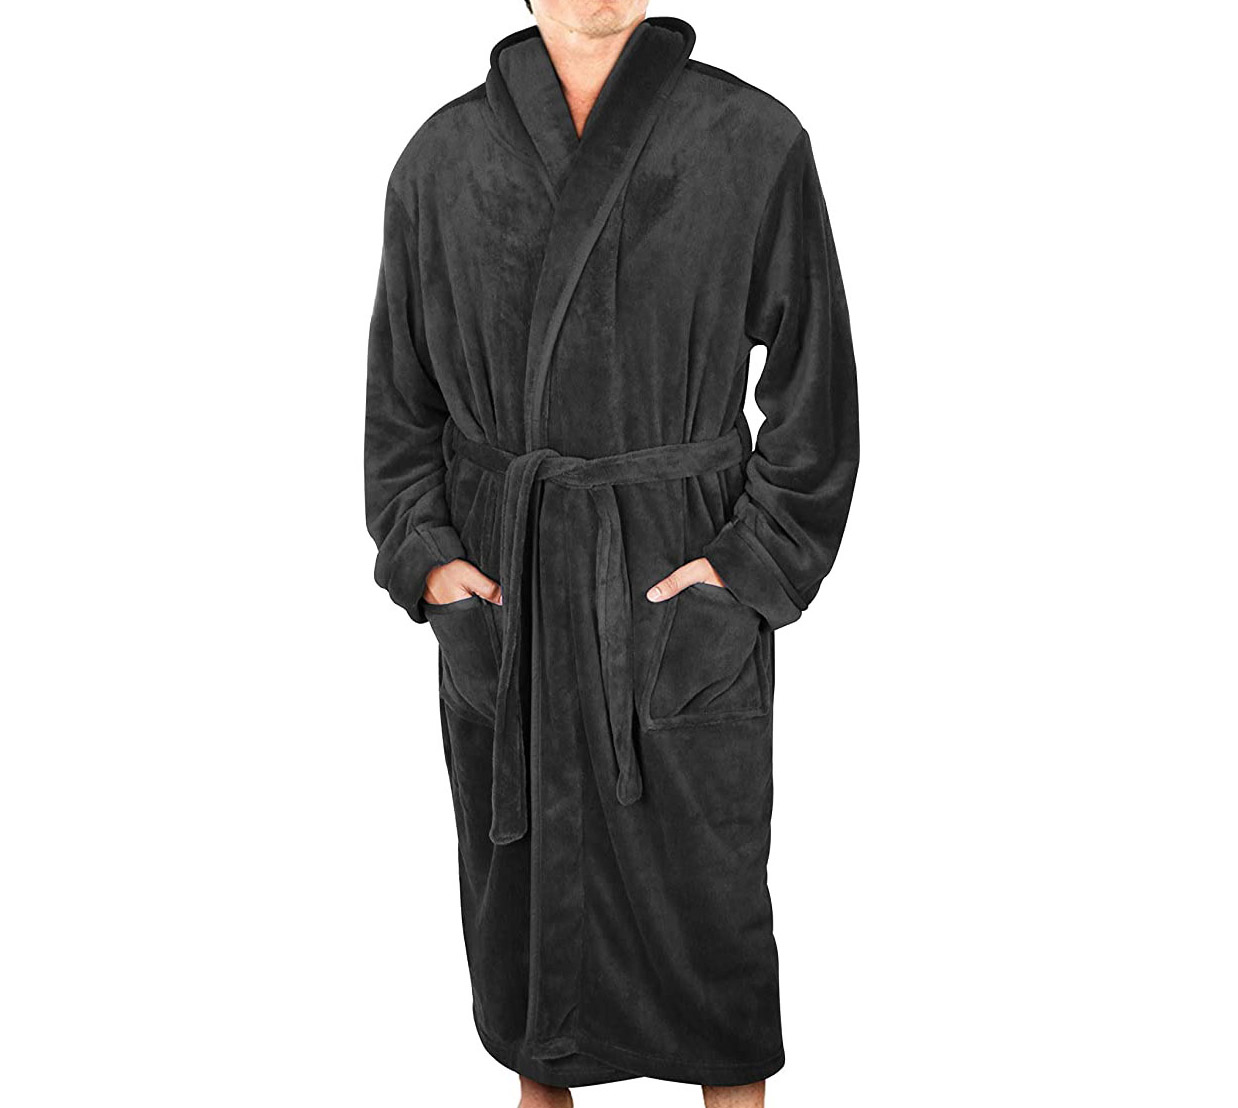 11 Best Men's Bathrobes To Chill Out In And Live Your Best Lounge Life ...